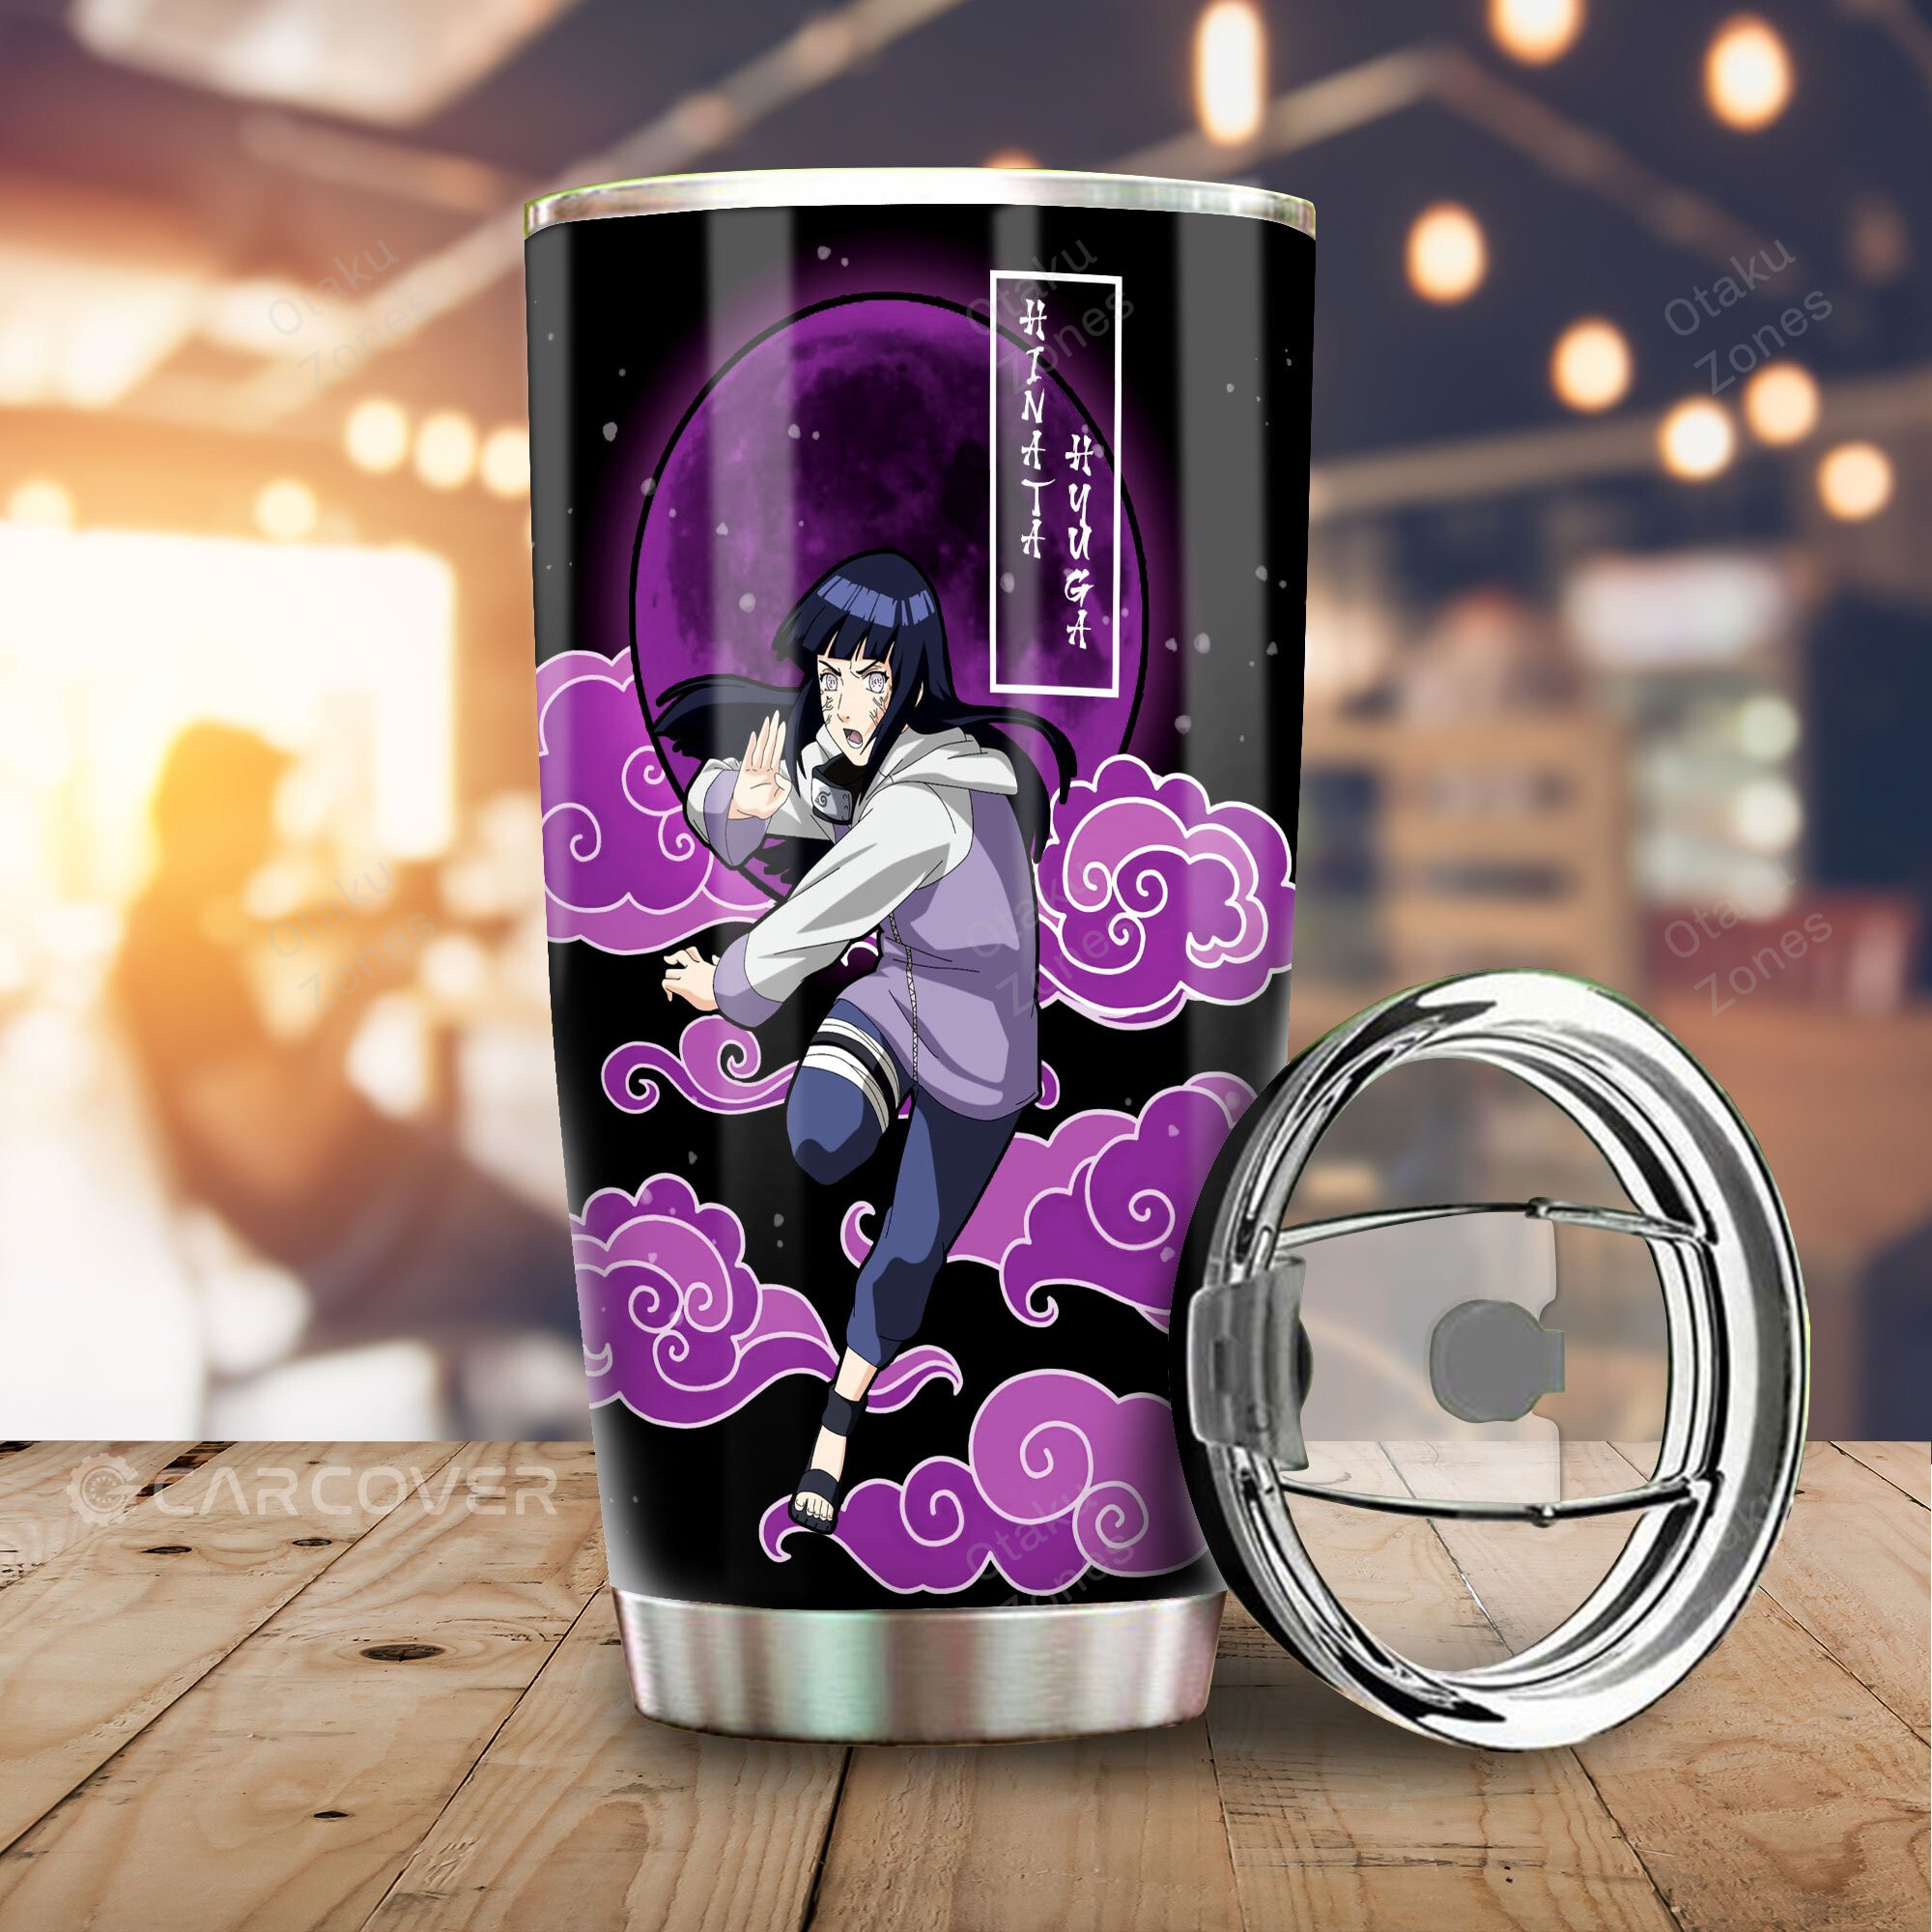 Show off your favorite Anime character in style with these products 4